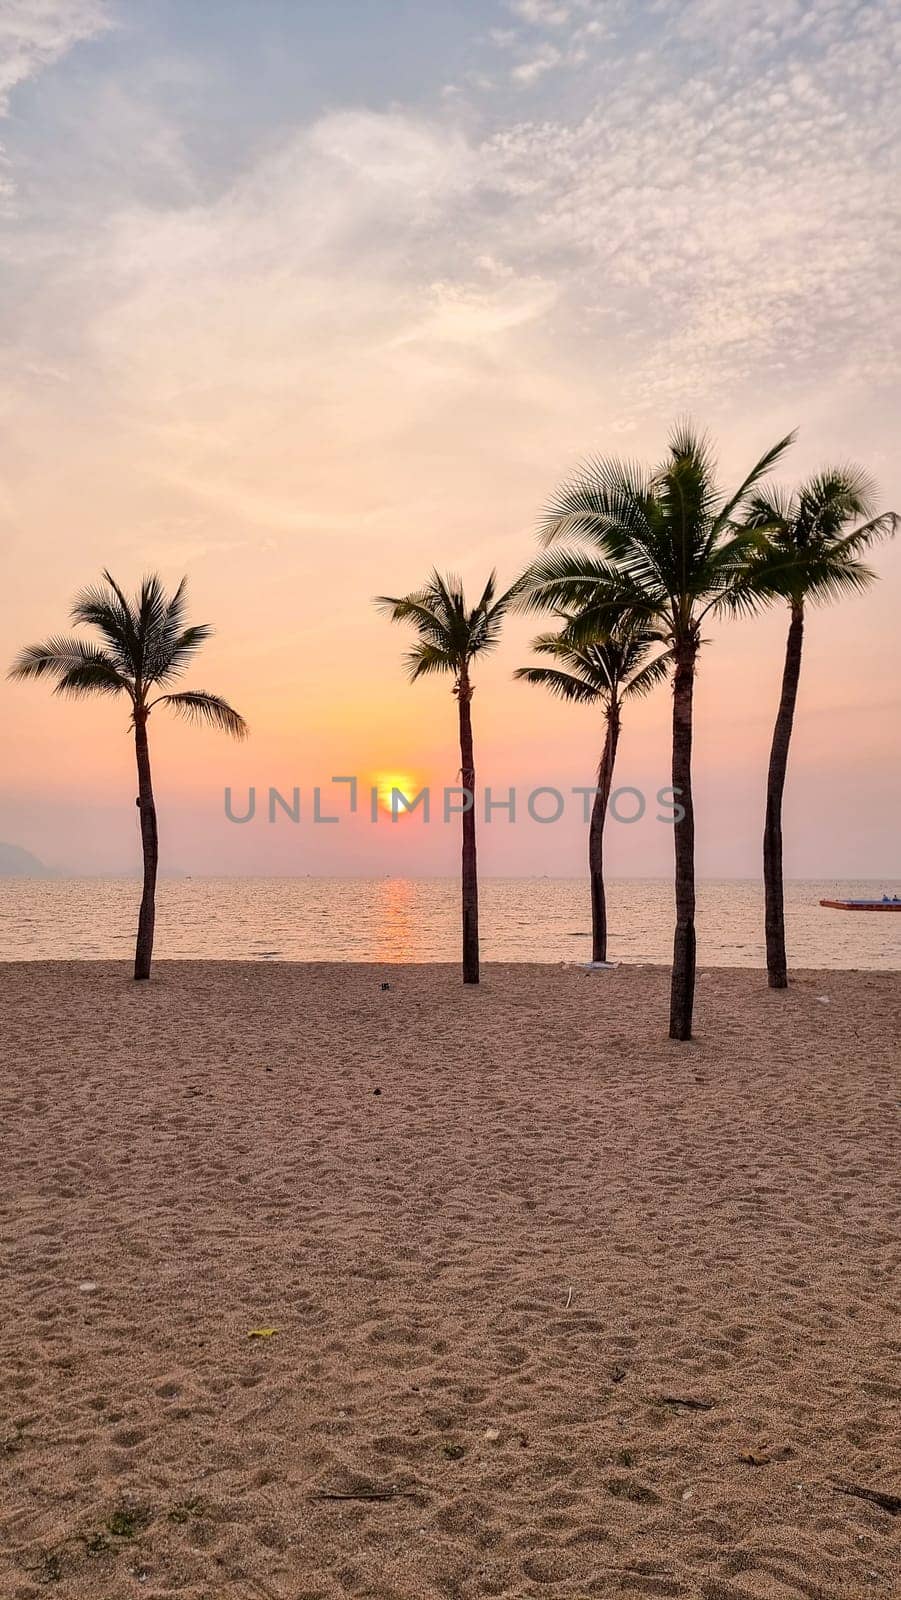 Palm trees sway gently in the breeze as a boat peacefully glides in the distance on the tranquil beach. Pattaya Thailand